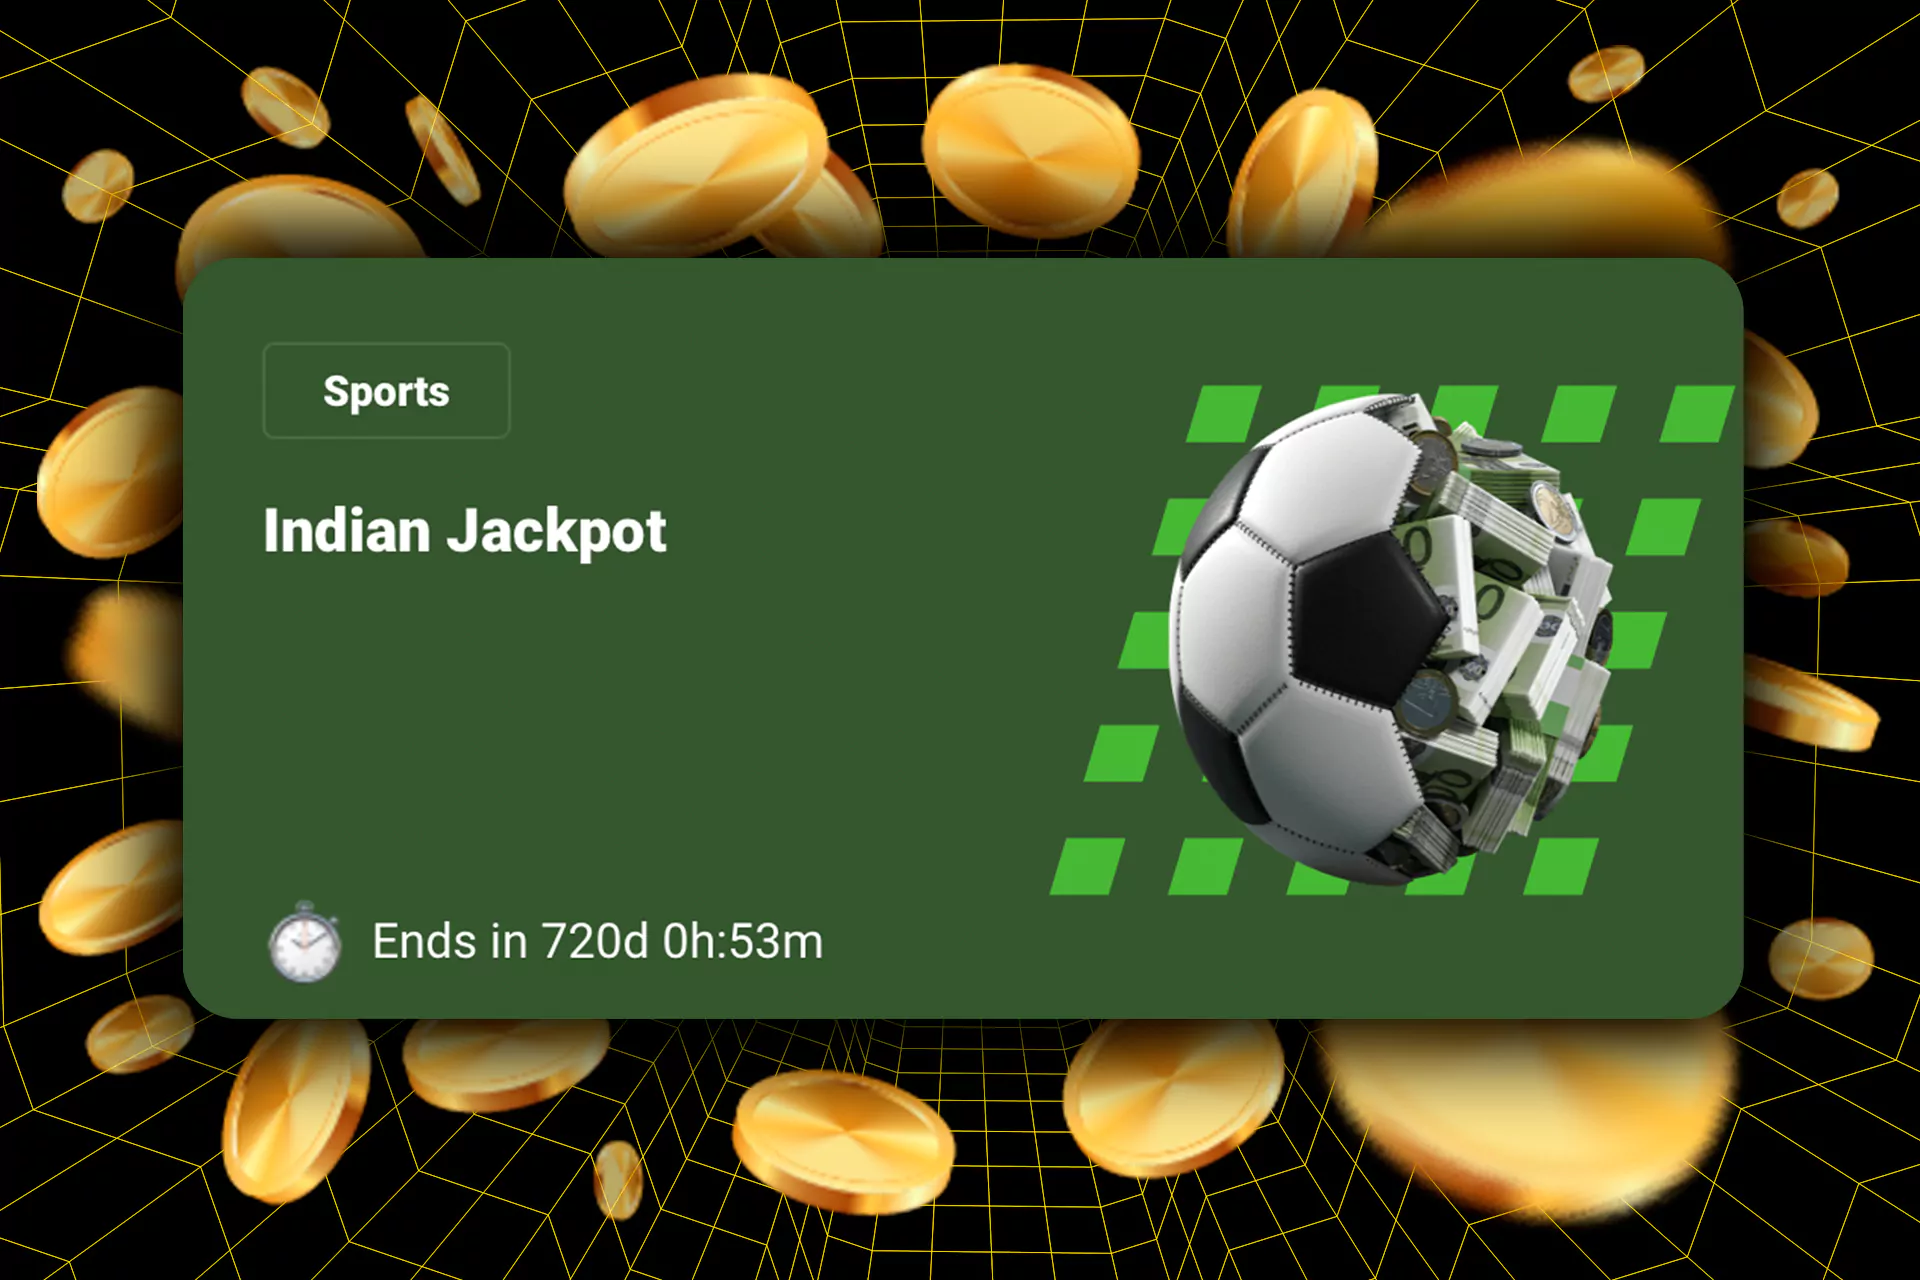 To become a winner in the Battle for Jackpot, place 20 bets in the TOTO promotion with 10 of them must win.